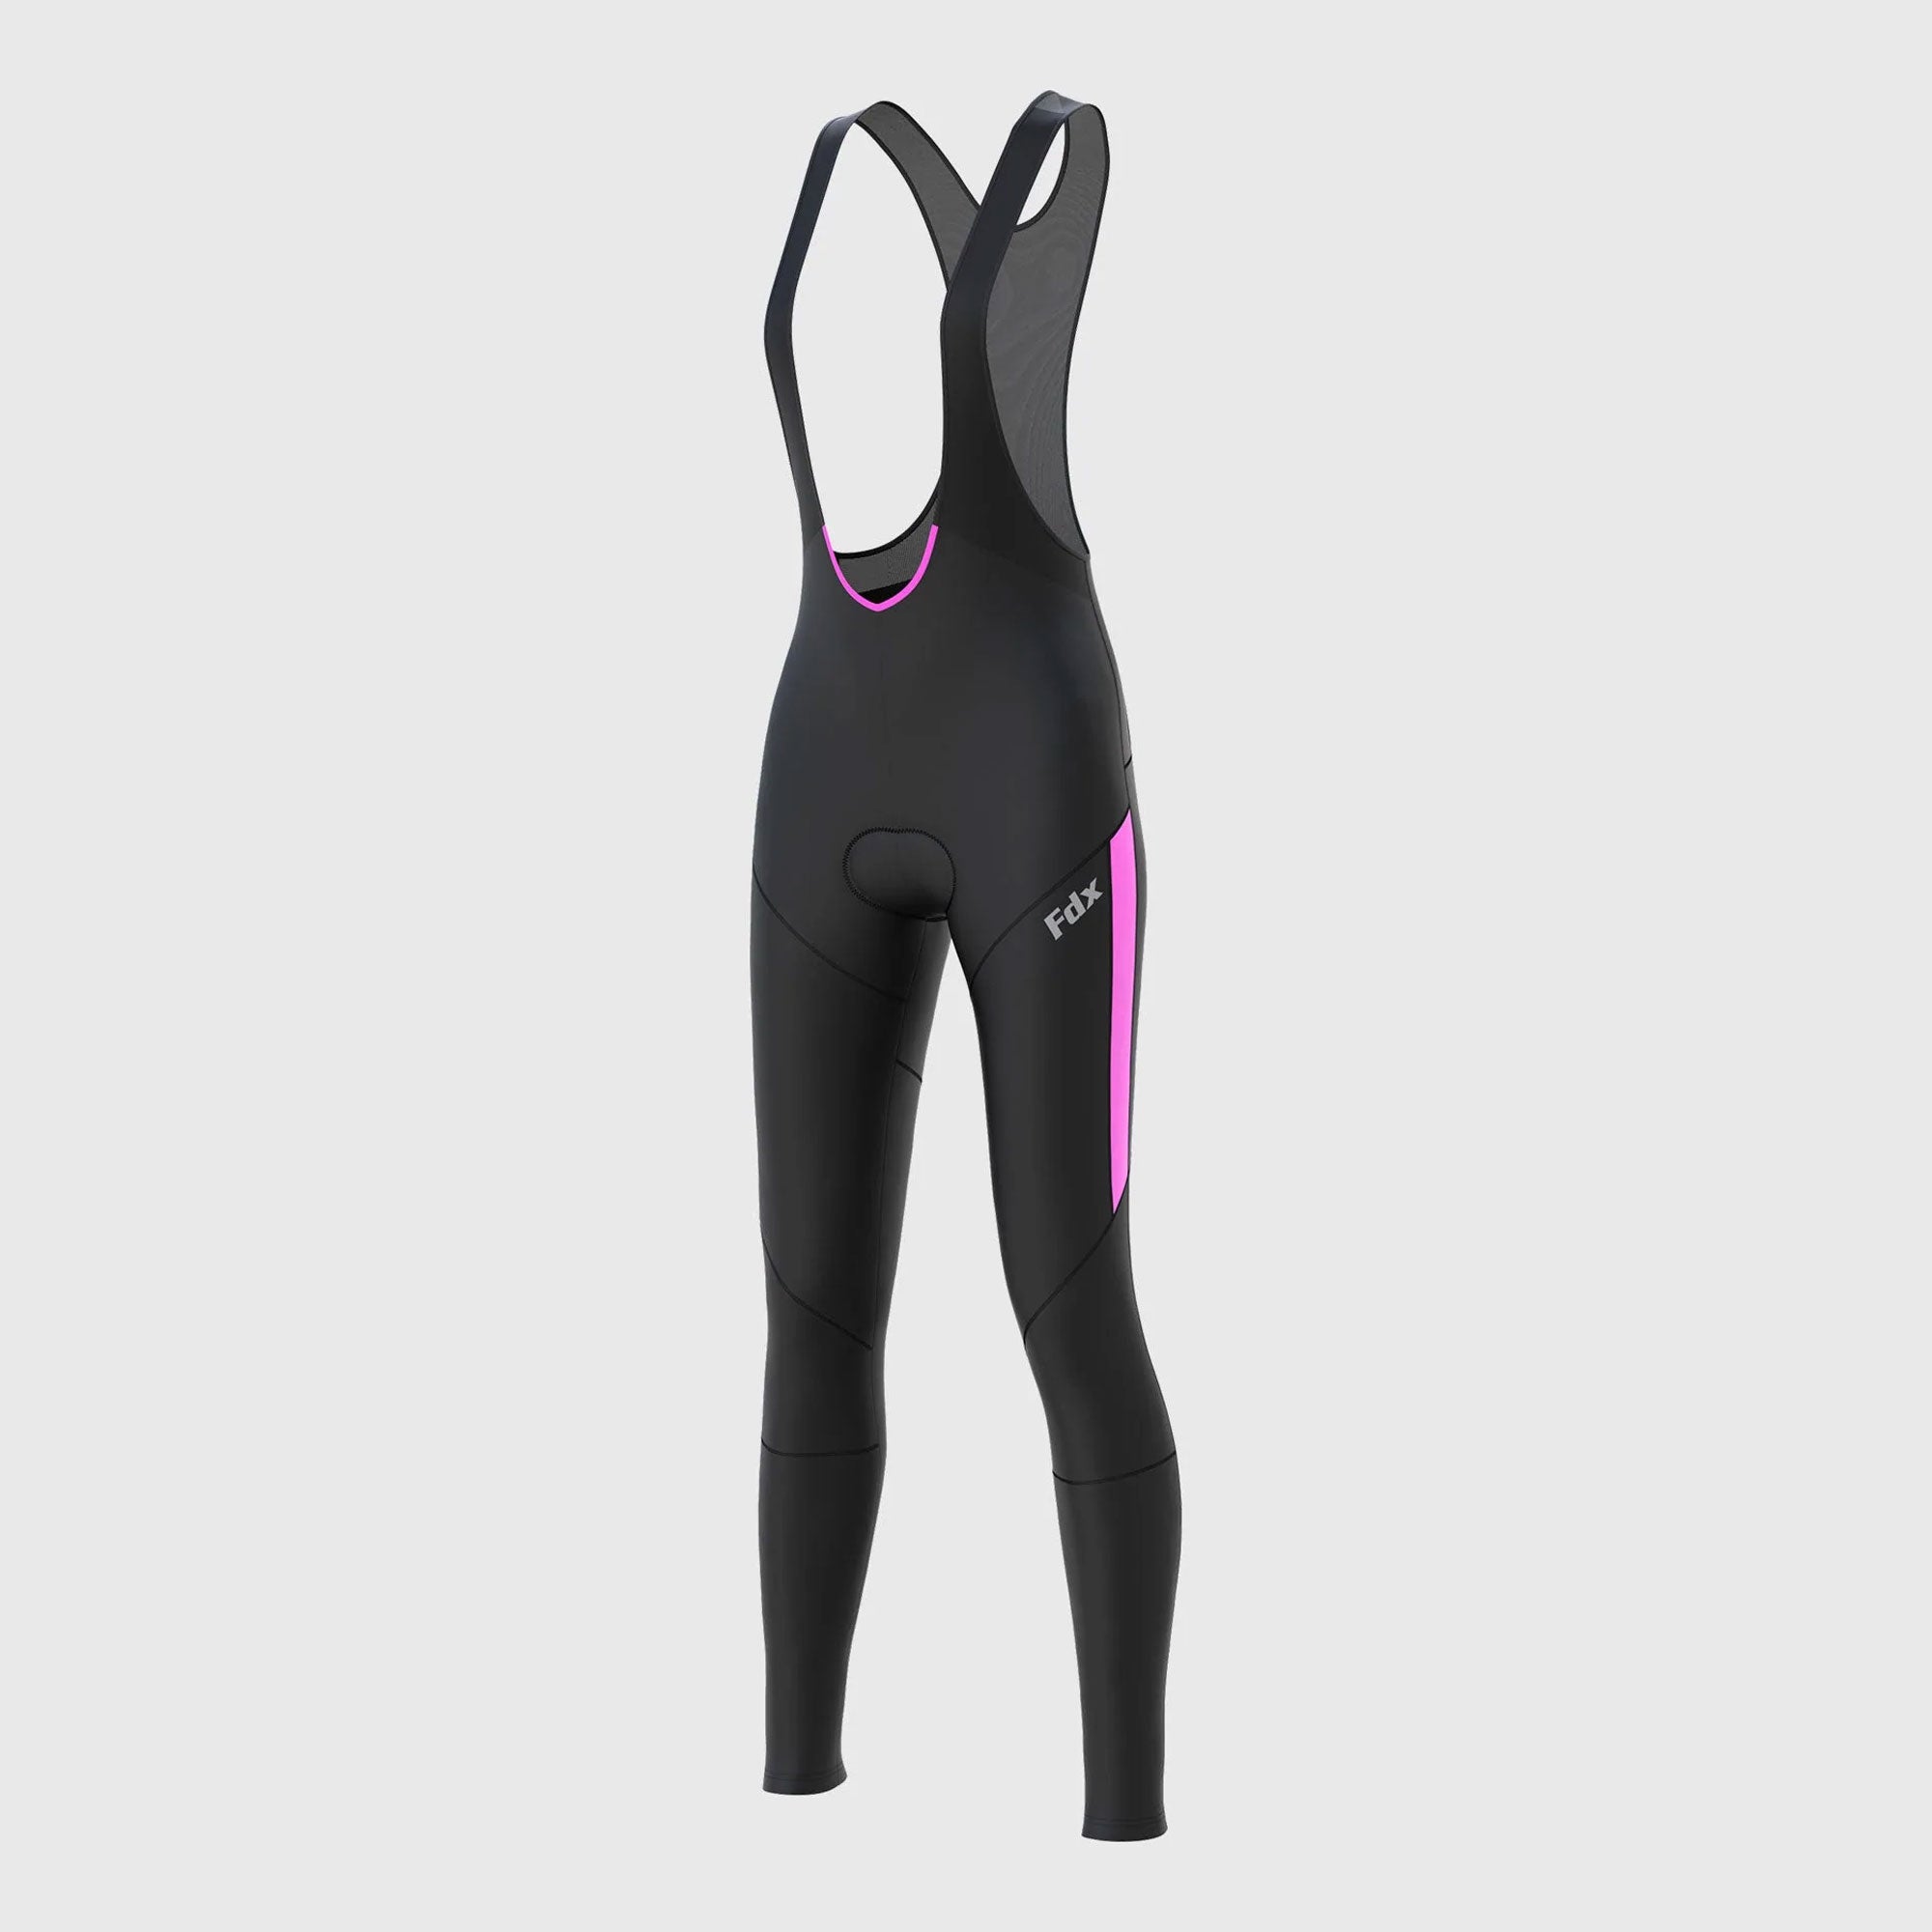 Womens 5D Gel Pad Cycling Tights With Bib For MTB And Road Biking  Autumn/Spring Padded Cycling Underwear Legging And Shorts From Shuwanqz,  $20.43